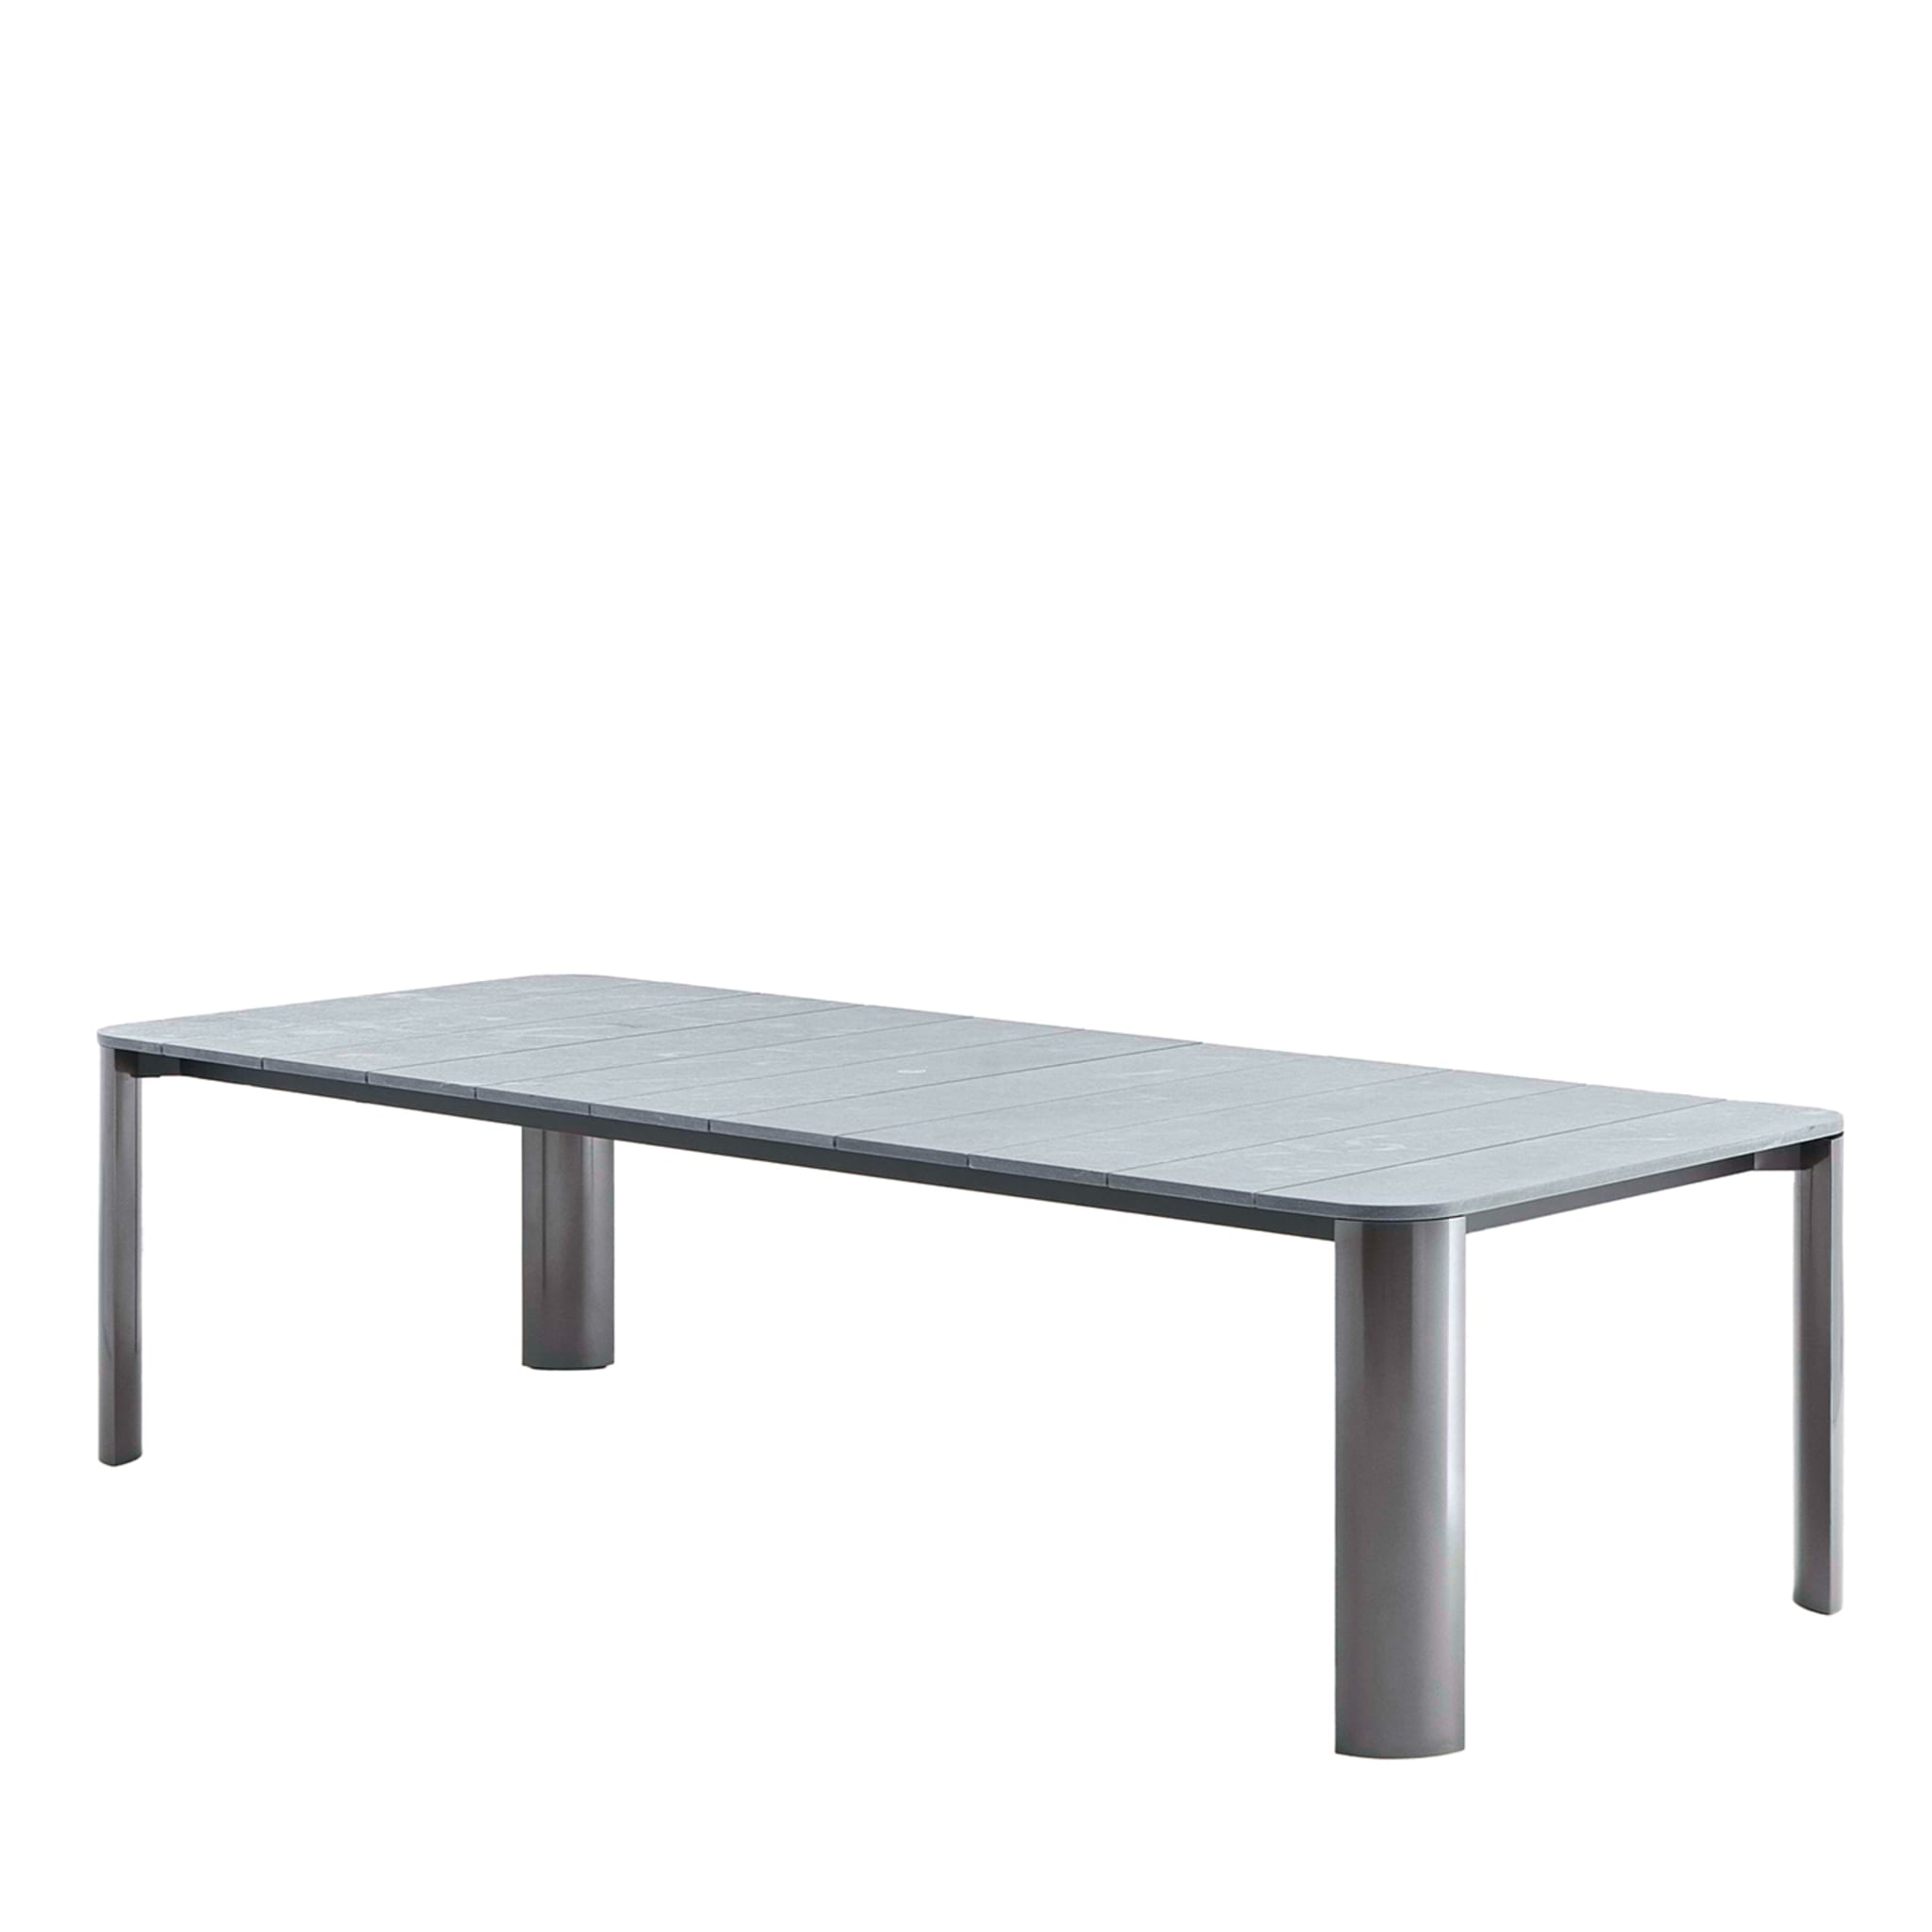 Outodoor Rectangular Gray Dining Table - Main view